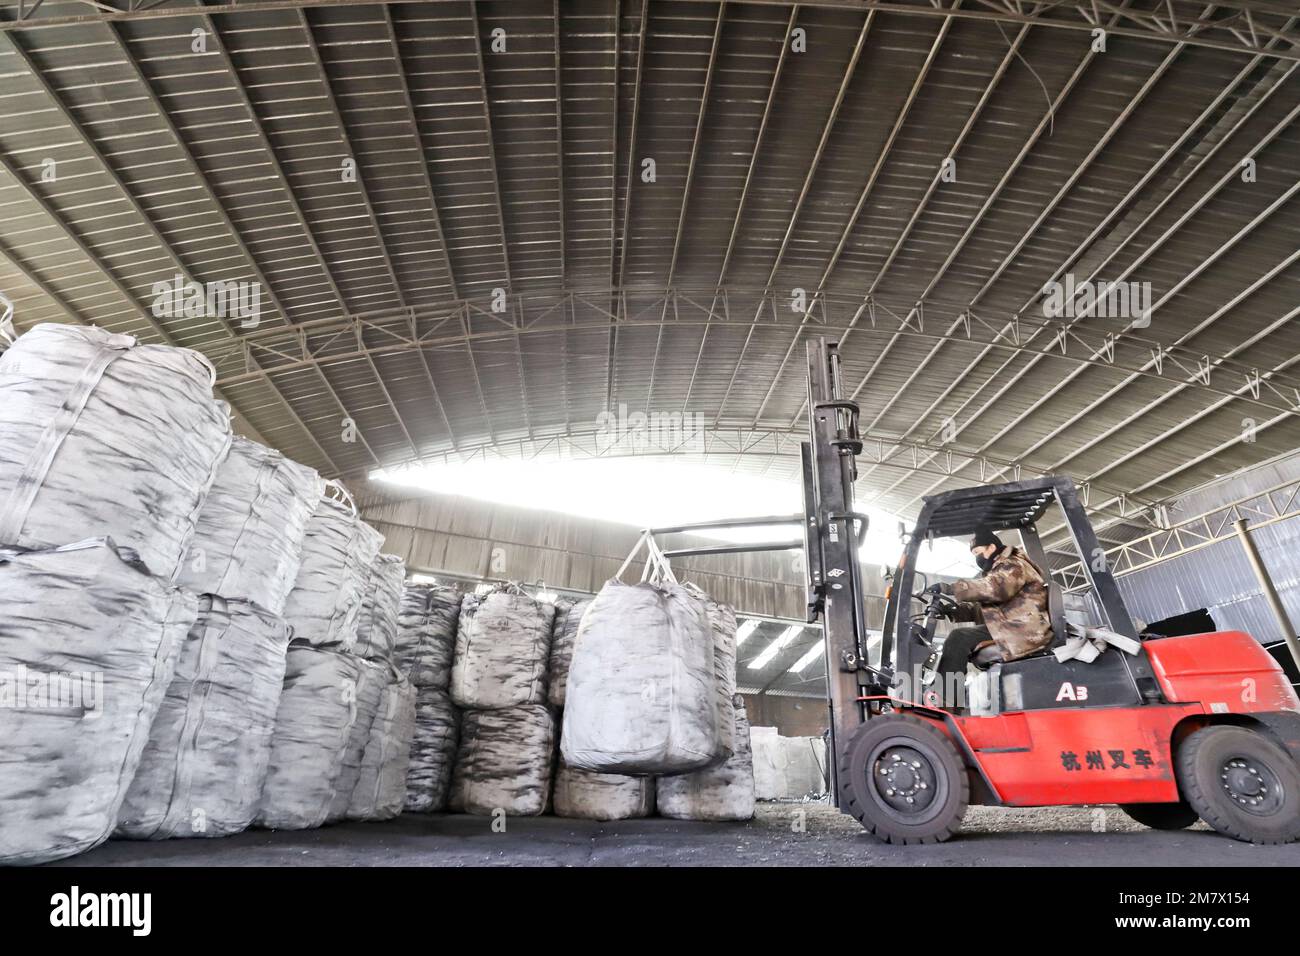 ZHANGYE, CHINA - JANUARY 10, 2023 - Workers load finished metal silicon at a smelting plant in Zhangye city, Northwest China's Gansu province, Jan 10, Stock Photo